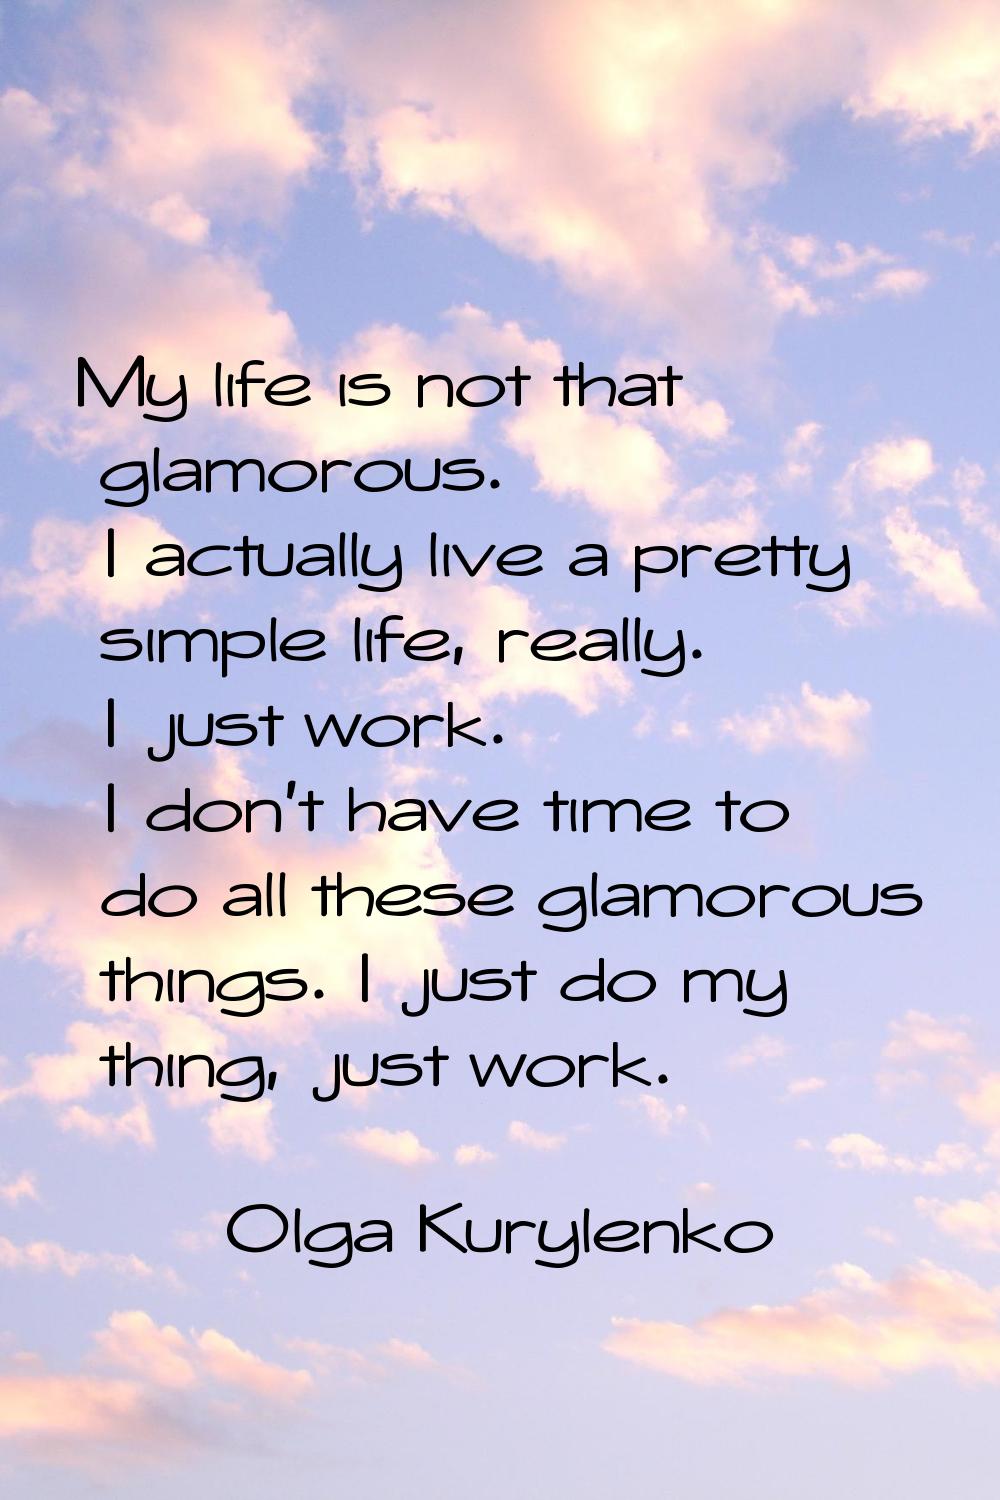 My life is not that glamorous. I actually live a pretty simple life, really. I just work. I don't h